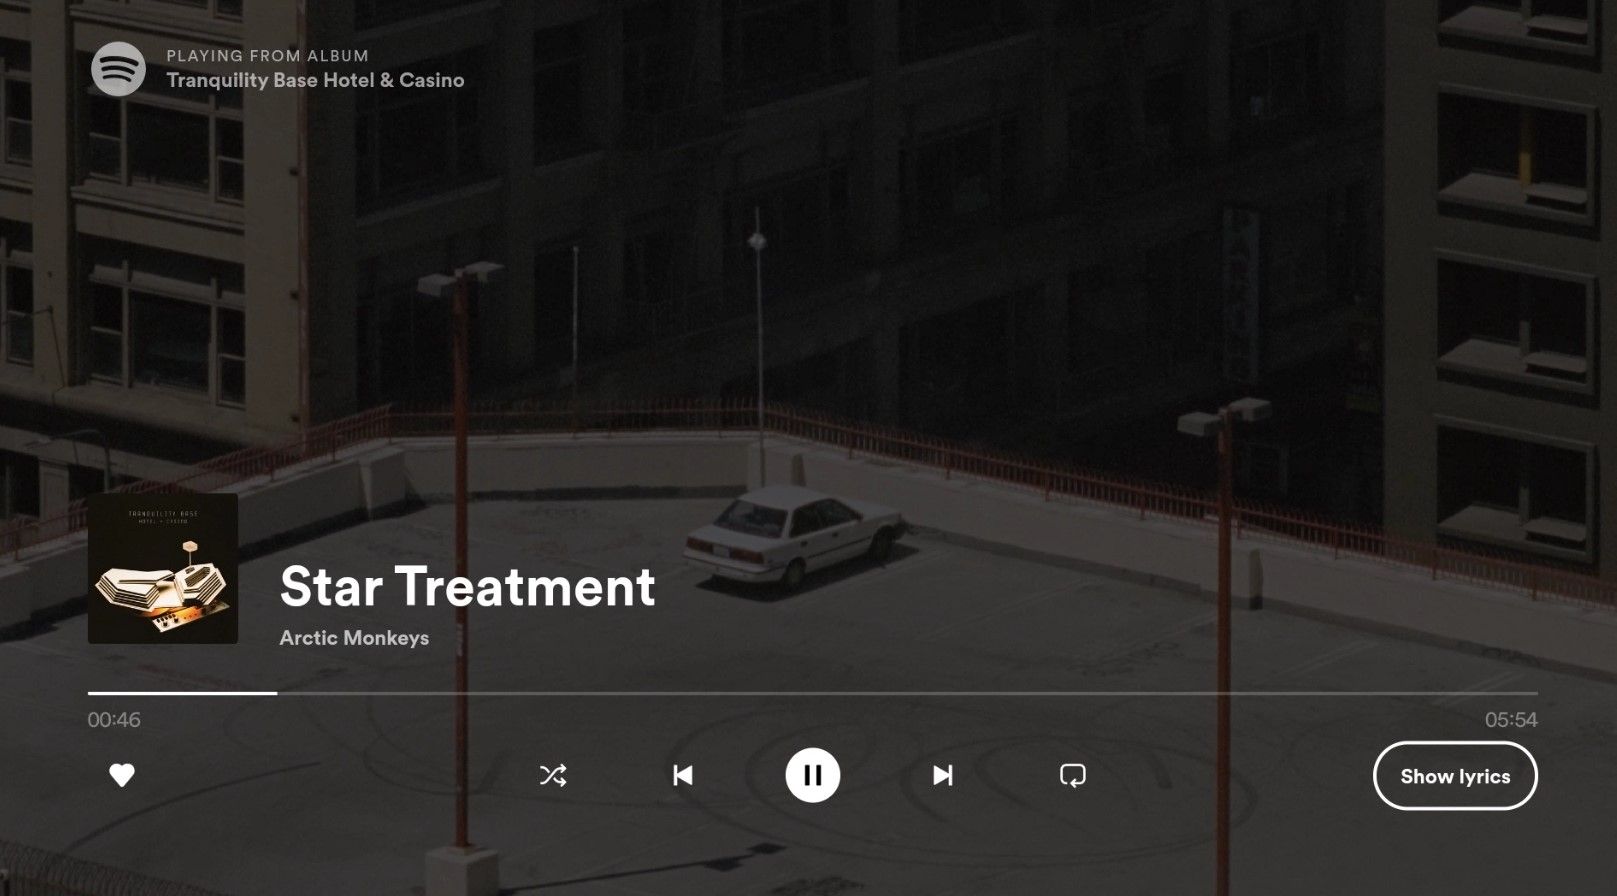 Spotify on Android TV